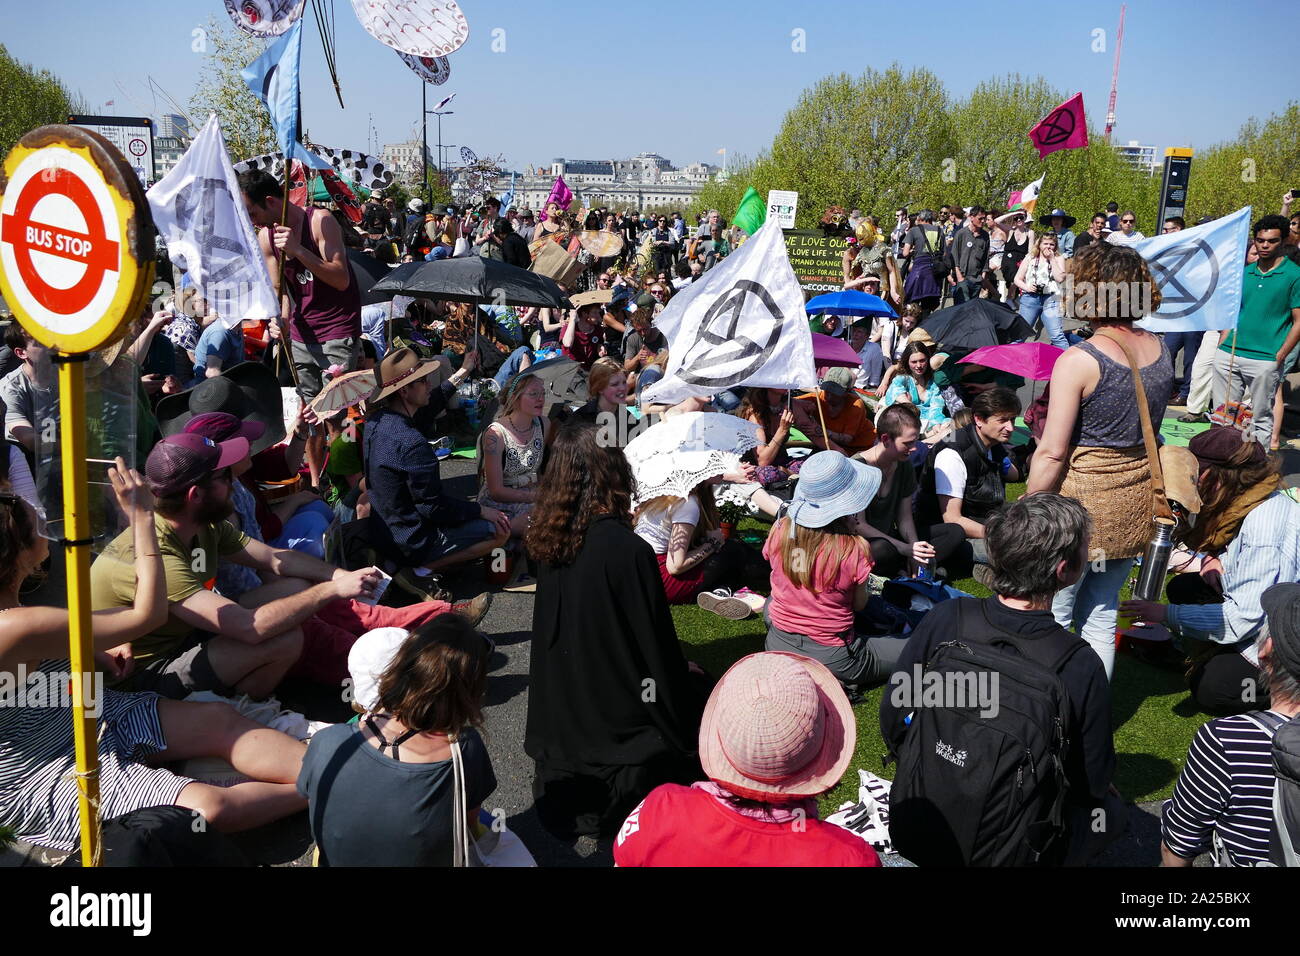 Extinction Rebellion climate change protesters protest peacefully, by occcupying Waterloo Bridge, in London. April 20th 2019 Stock Photo